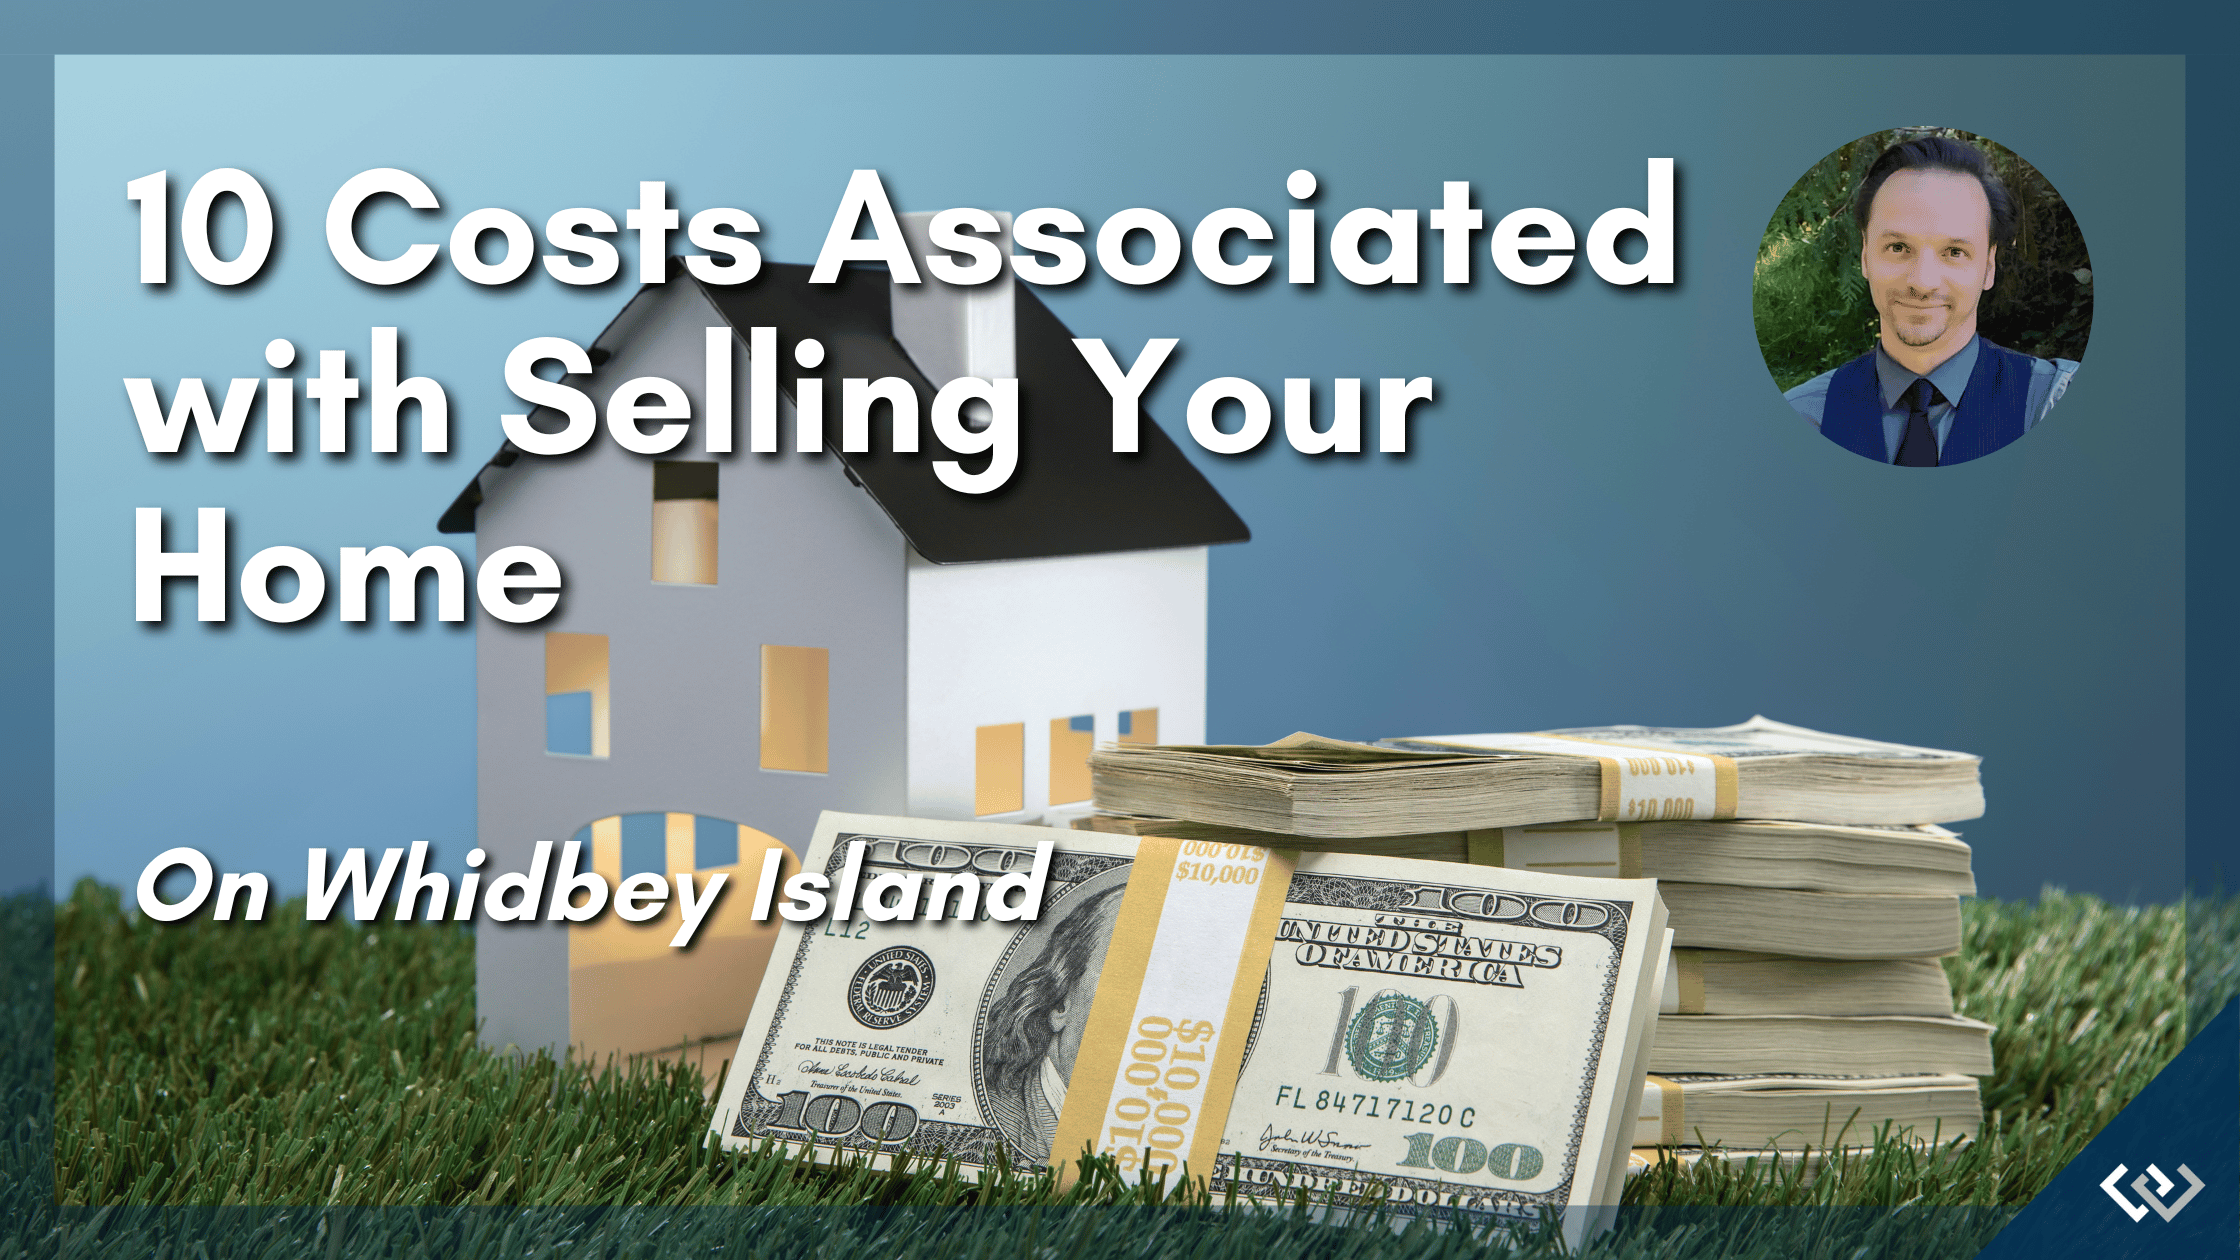 10 Costs Associated with Selling Your Home